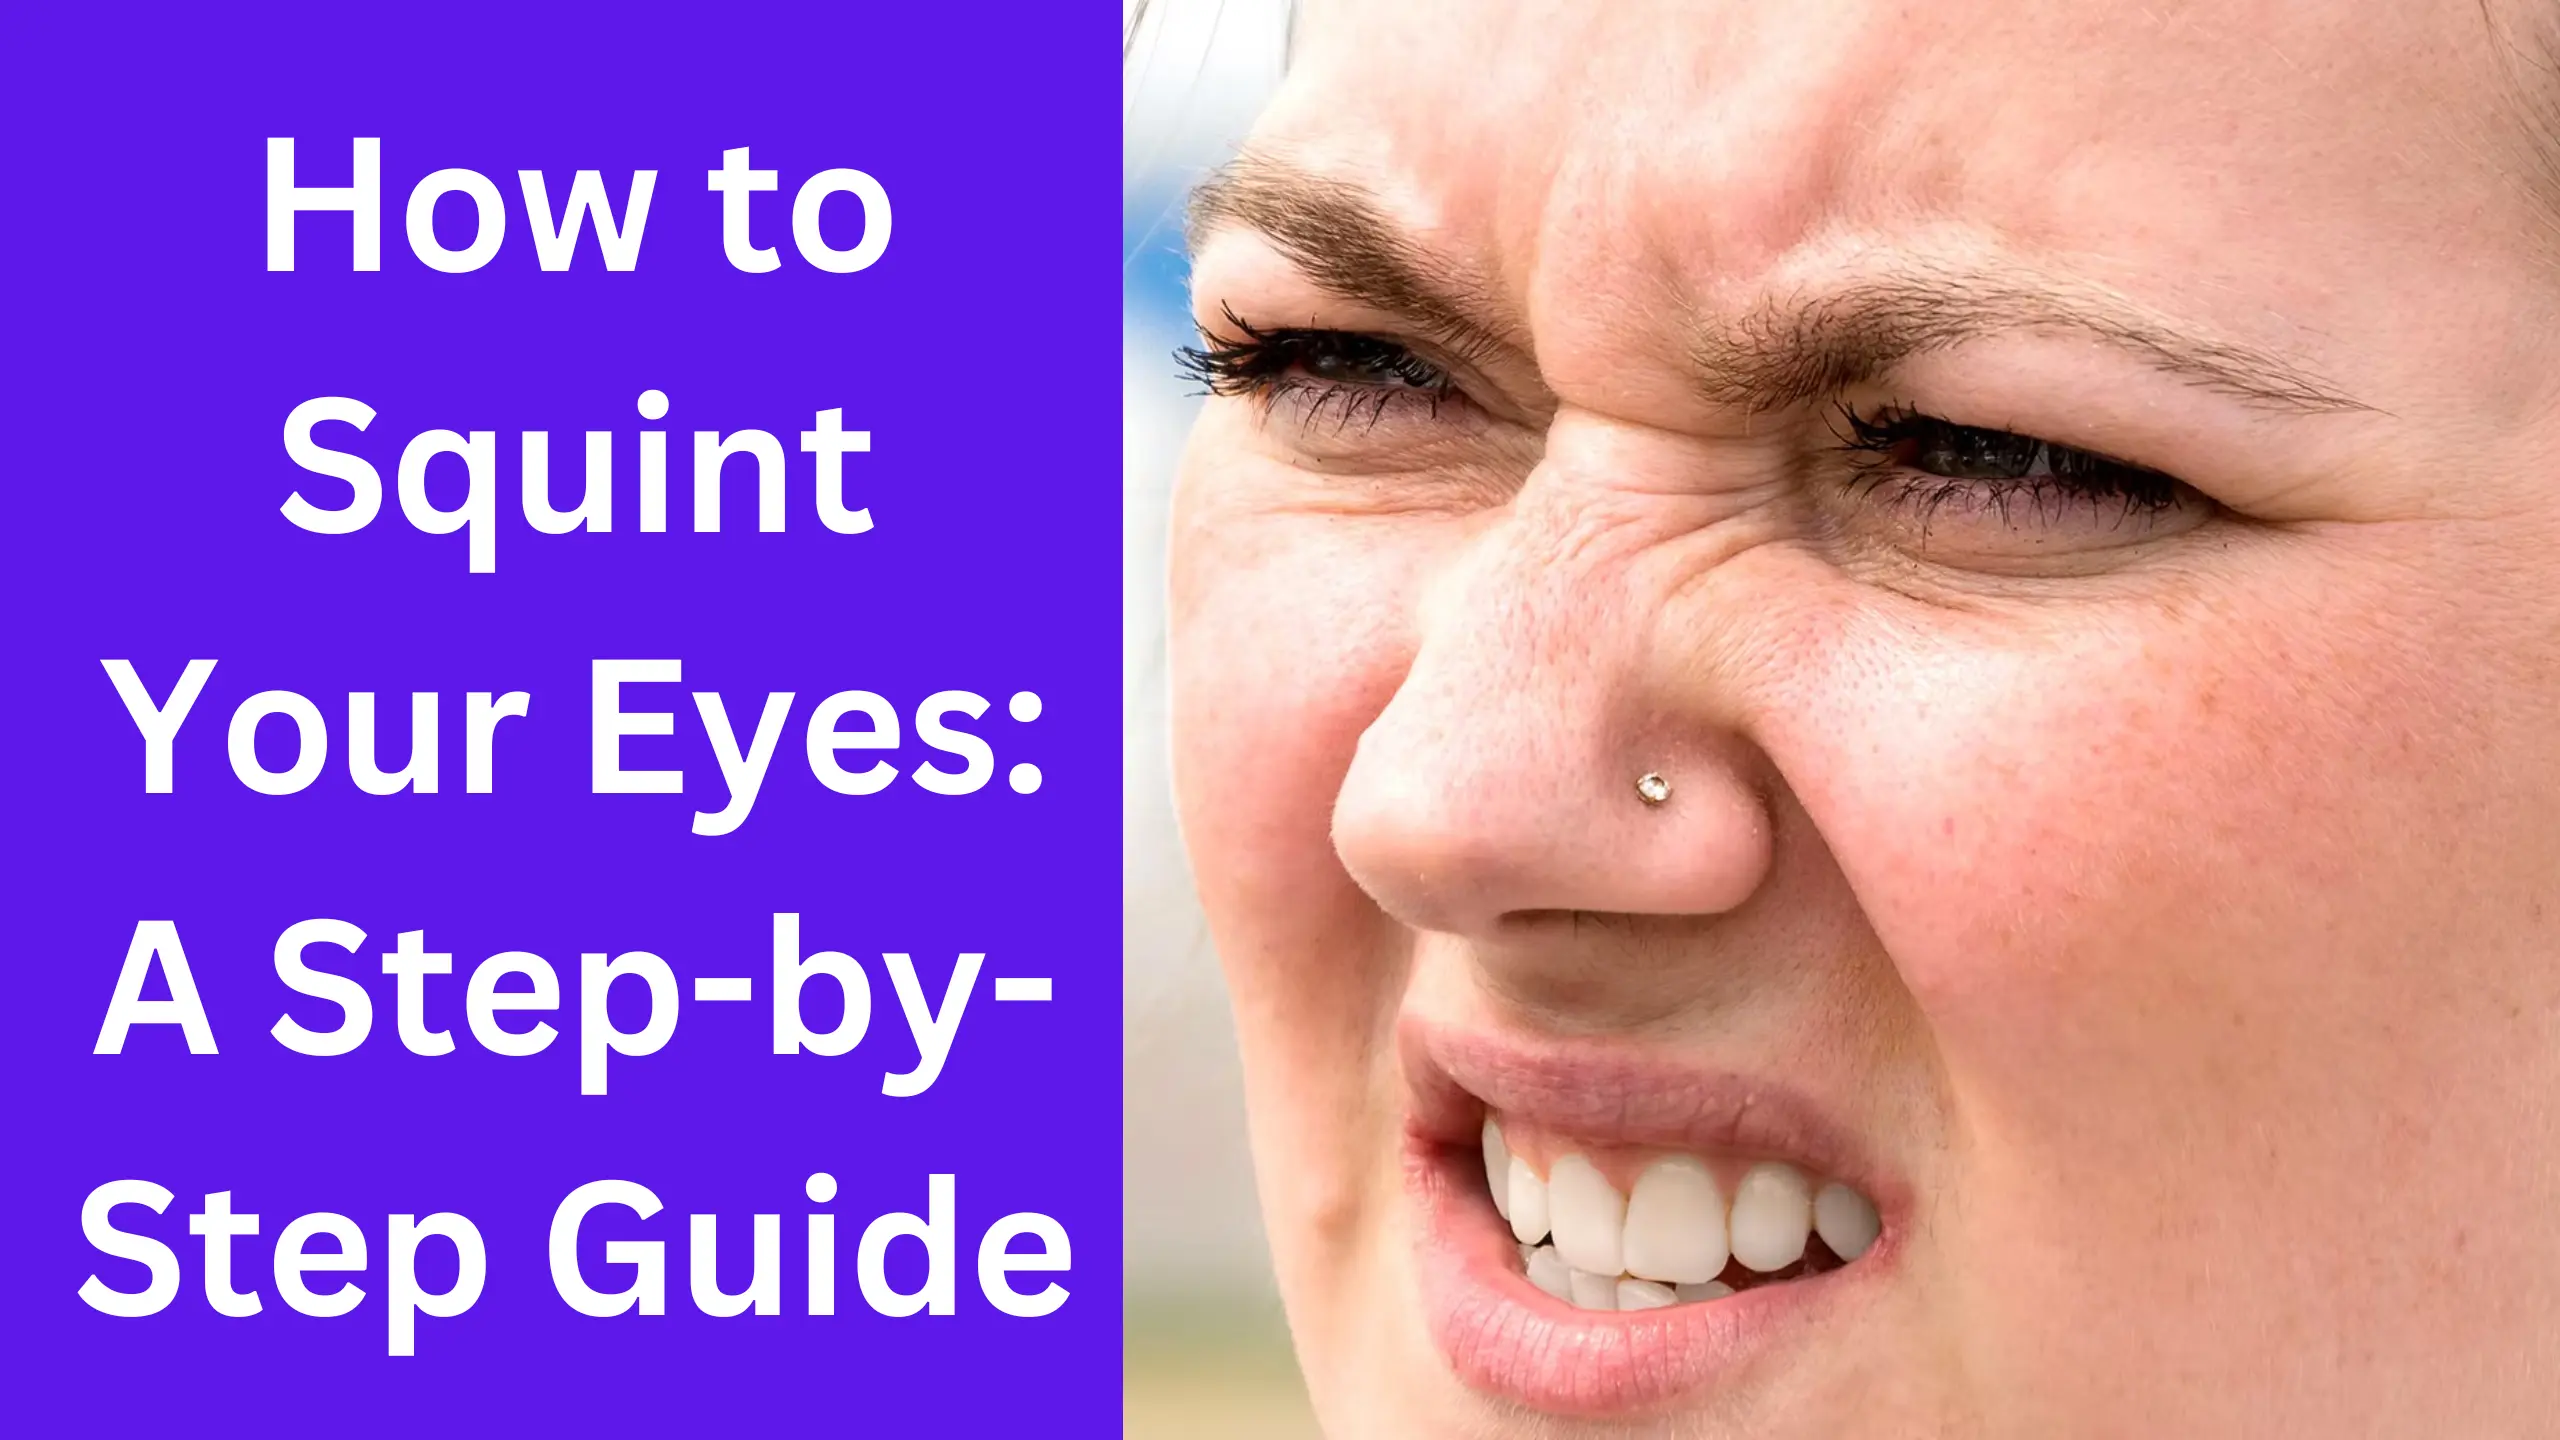 How to Squint Your Eyes A Step-by-Step Guide